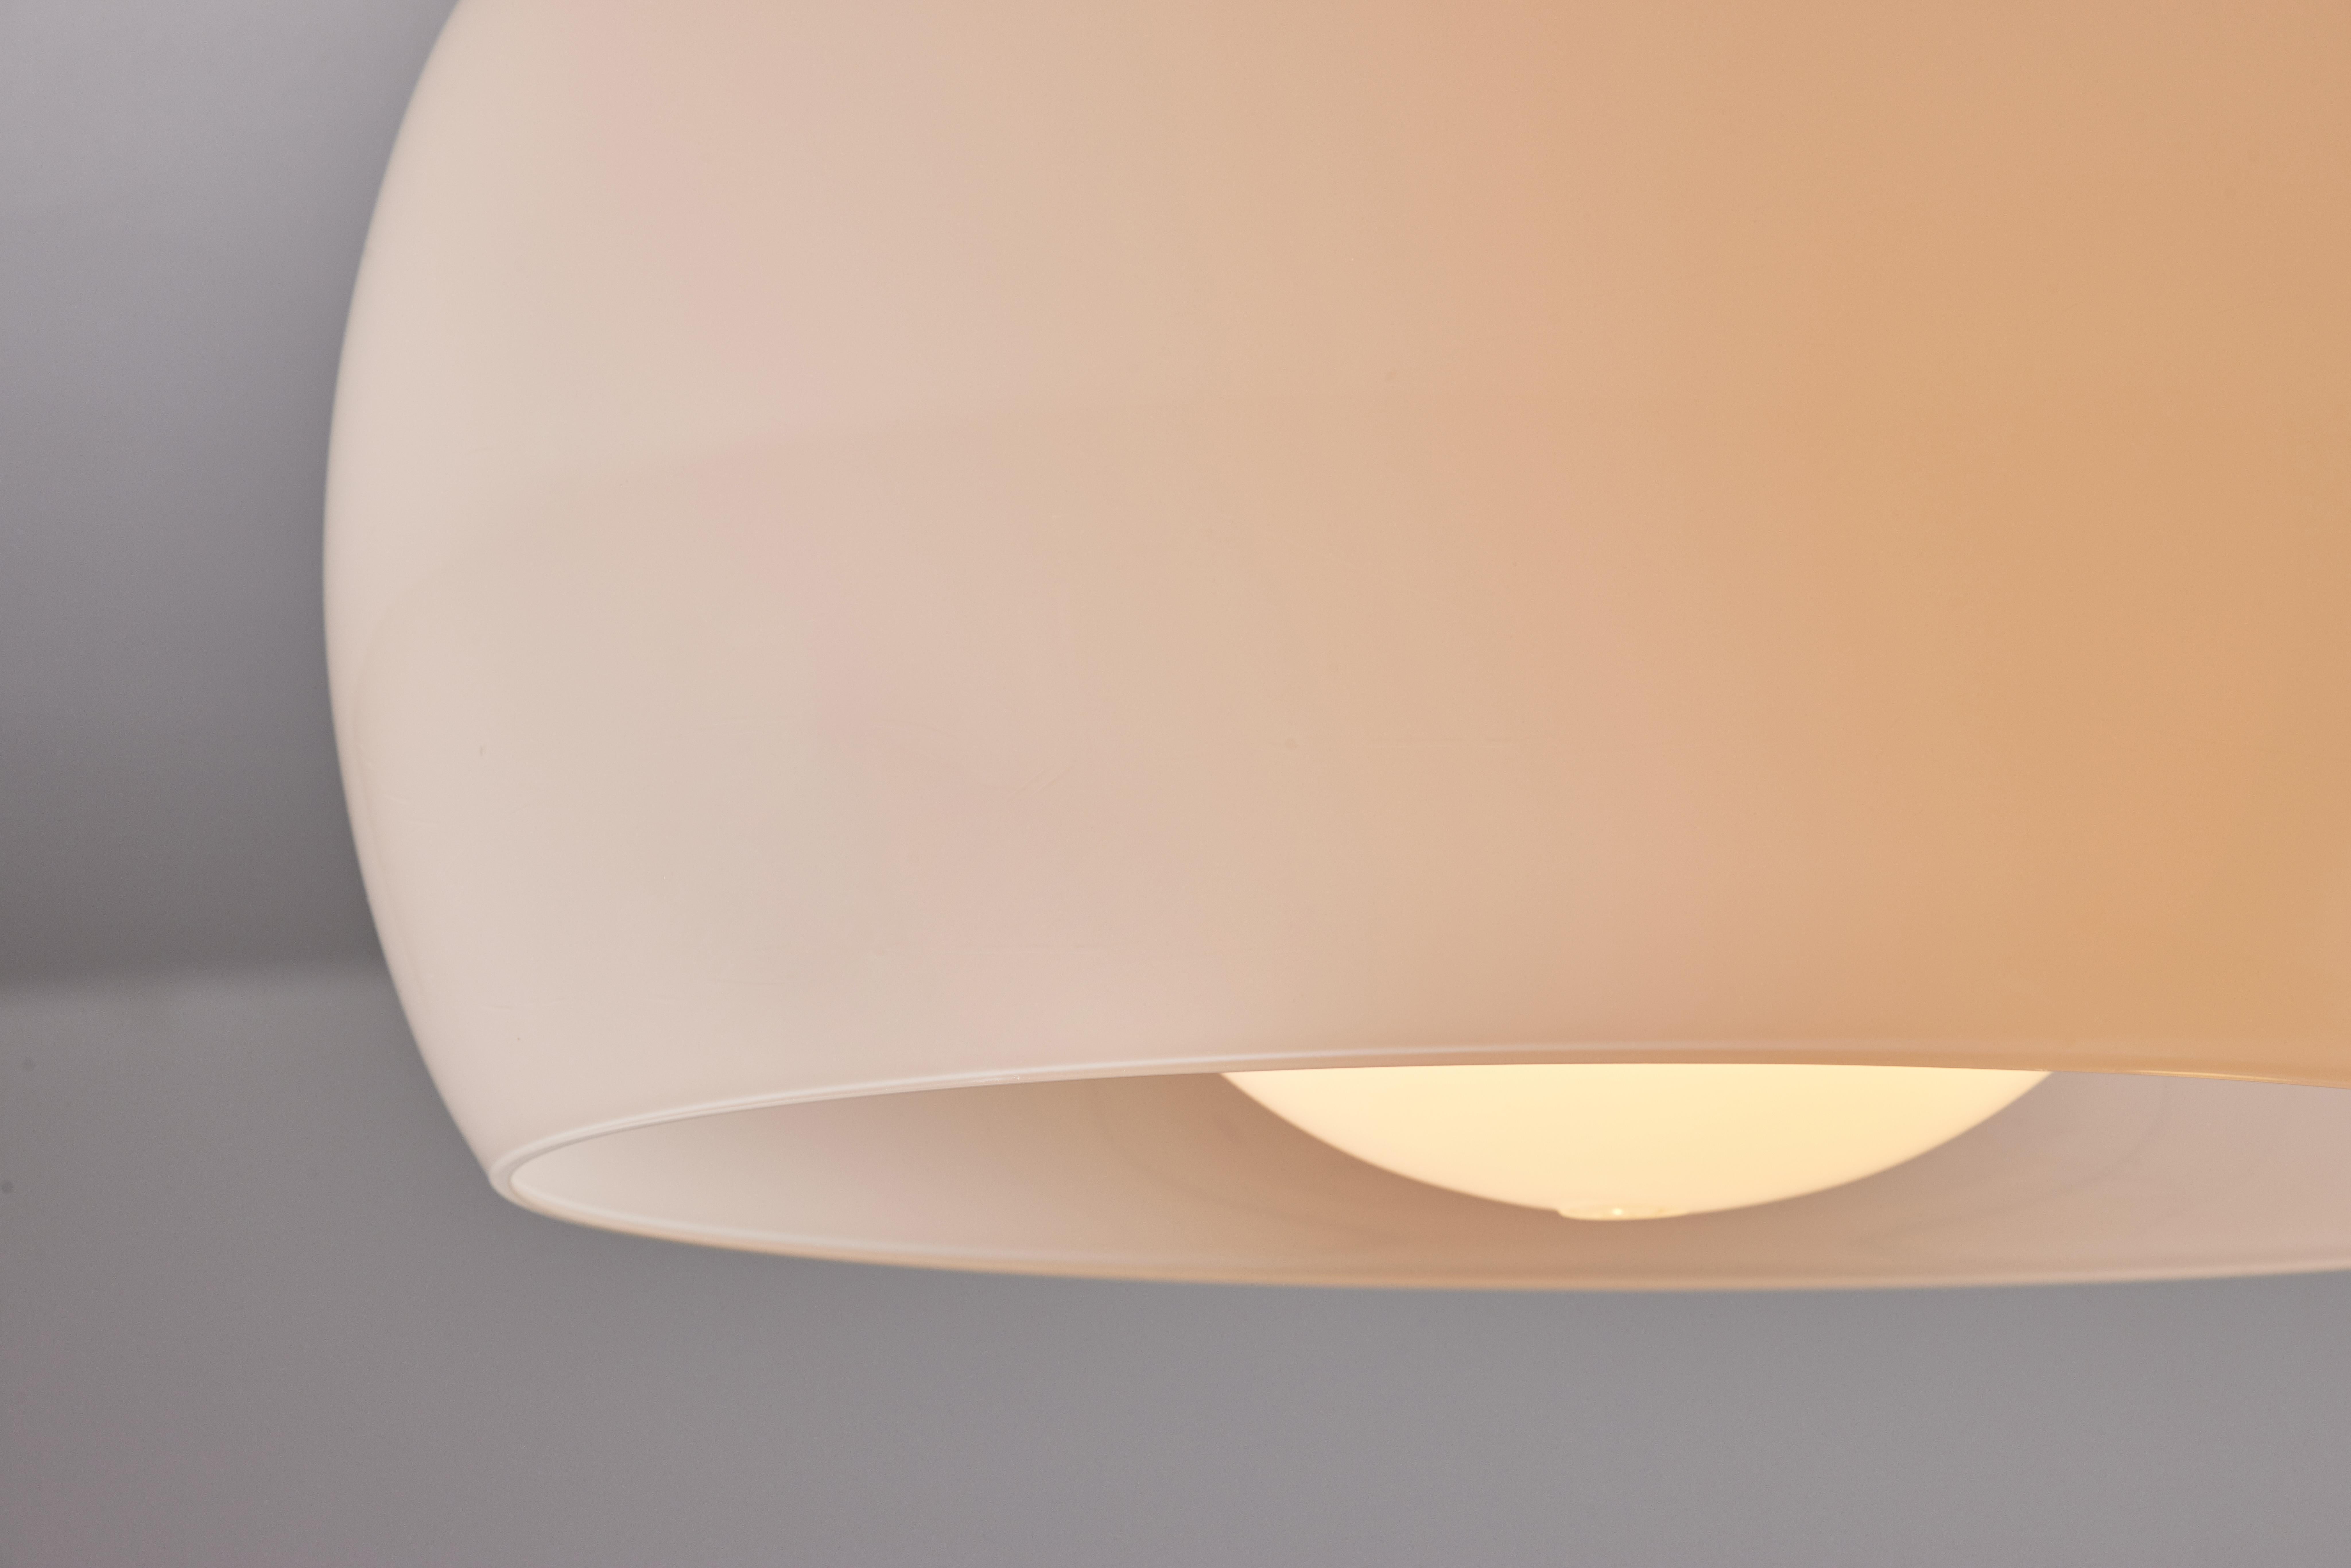 Metal Clinio Flush Mount Ceiling Light by Vico Magistretti for Artemide